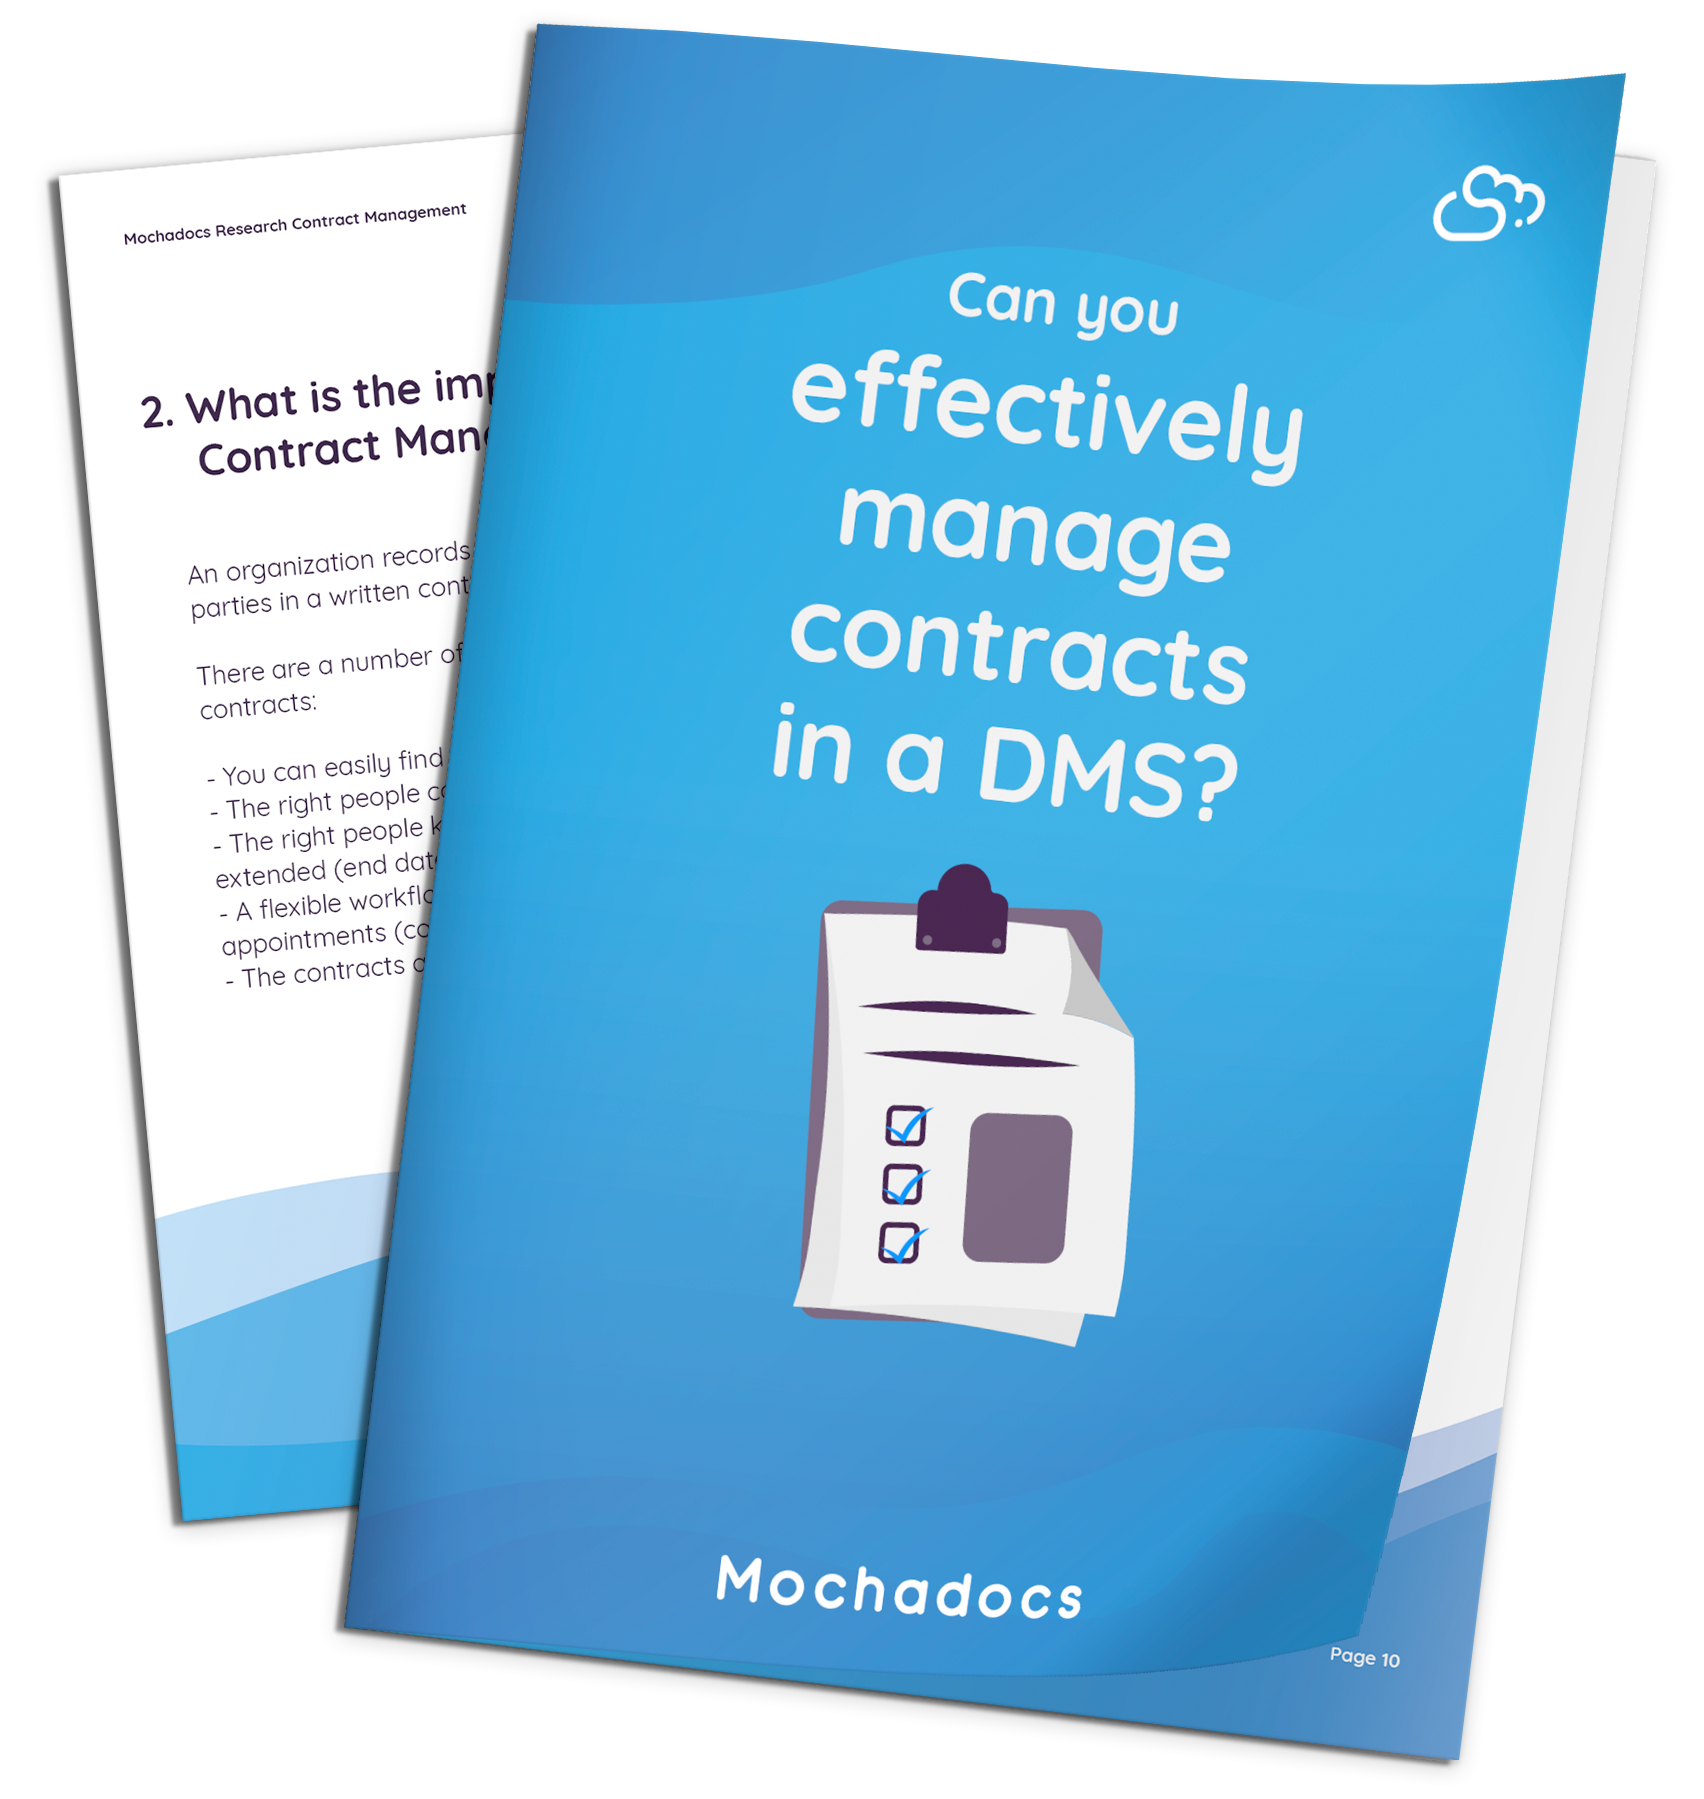 Mochadocs - Contract Management - eBook - Can you effectively manage contracts in a DMS?